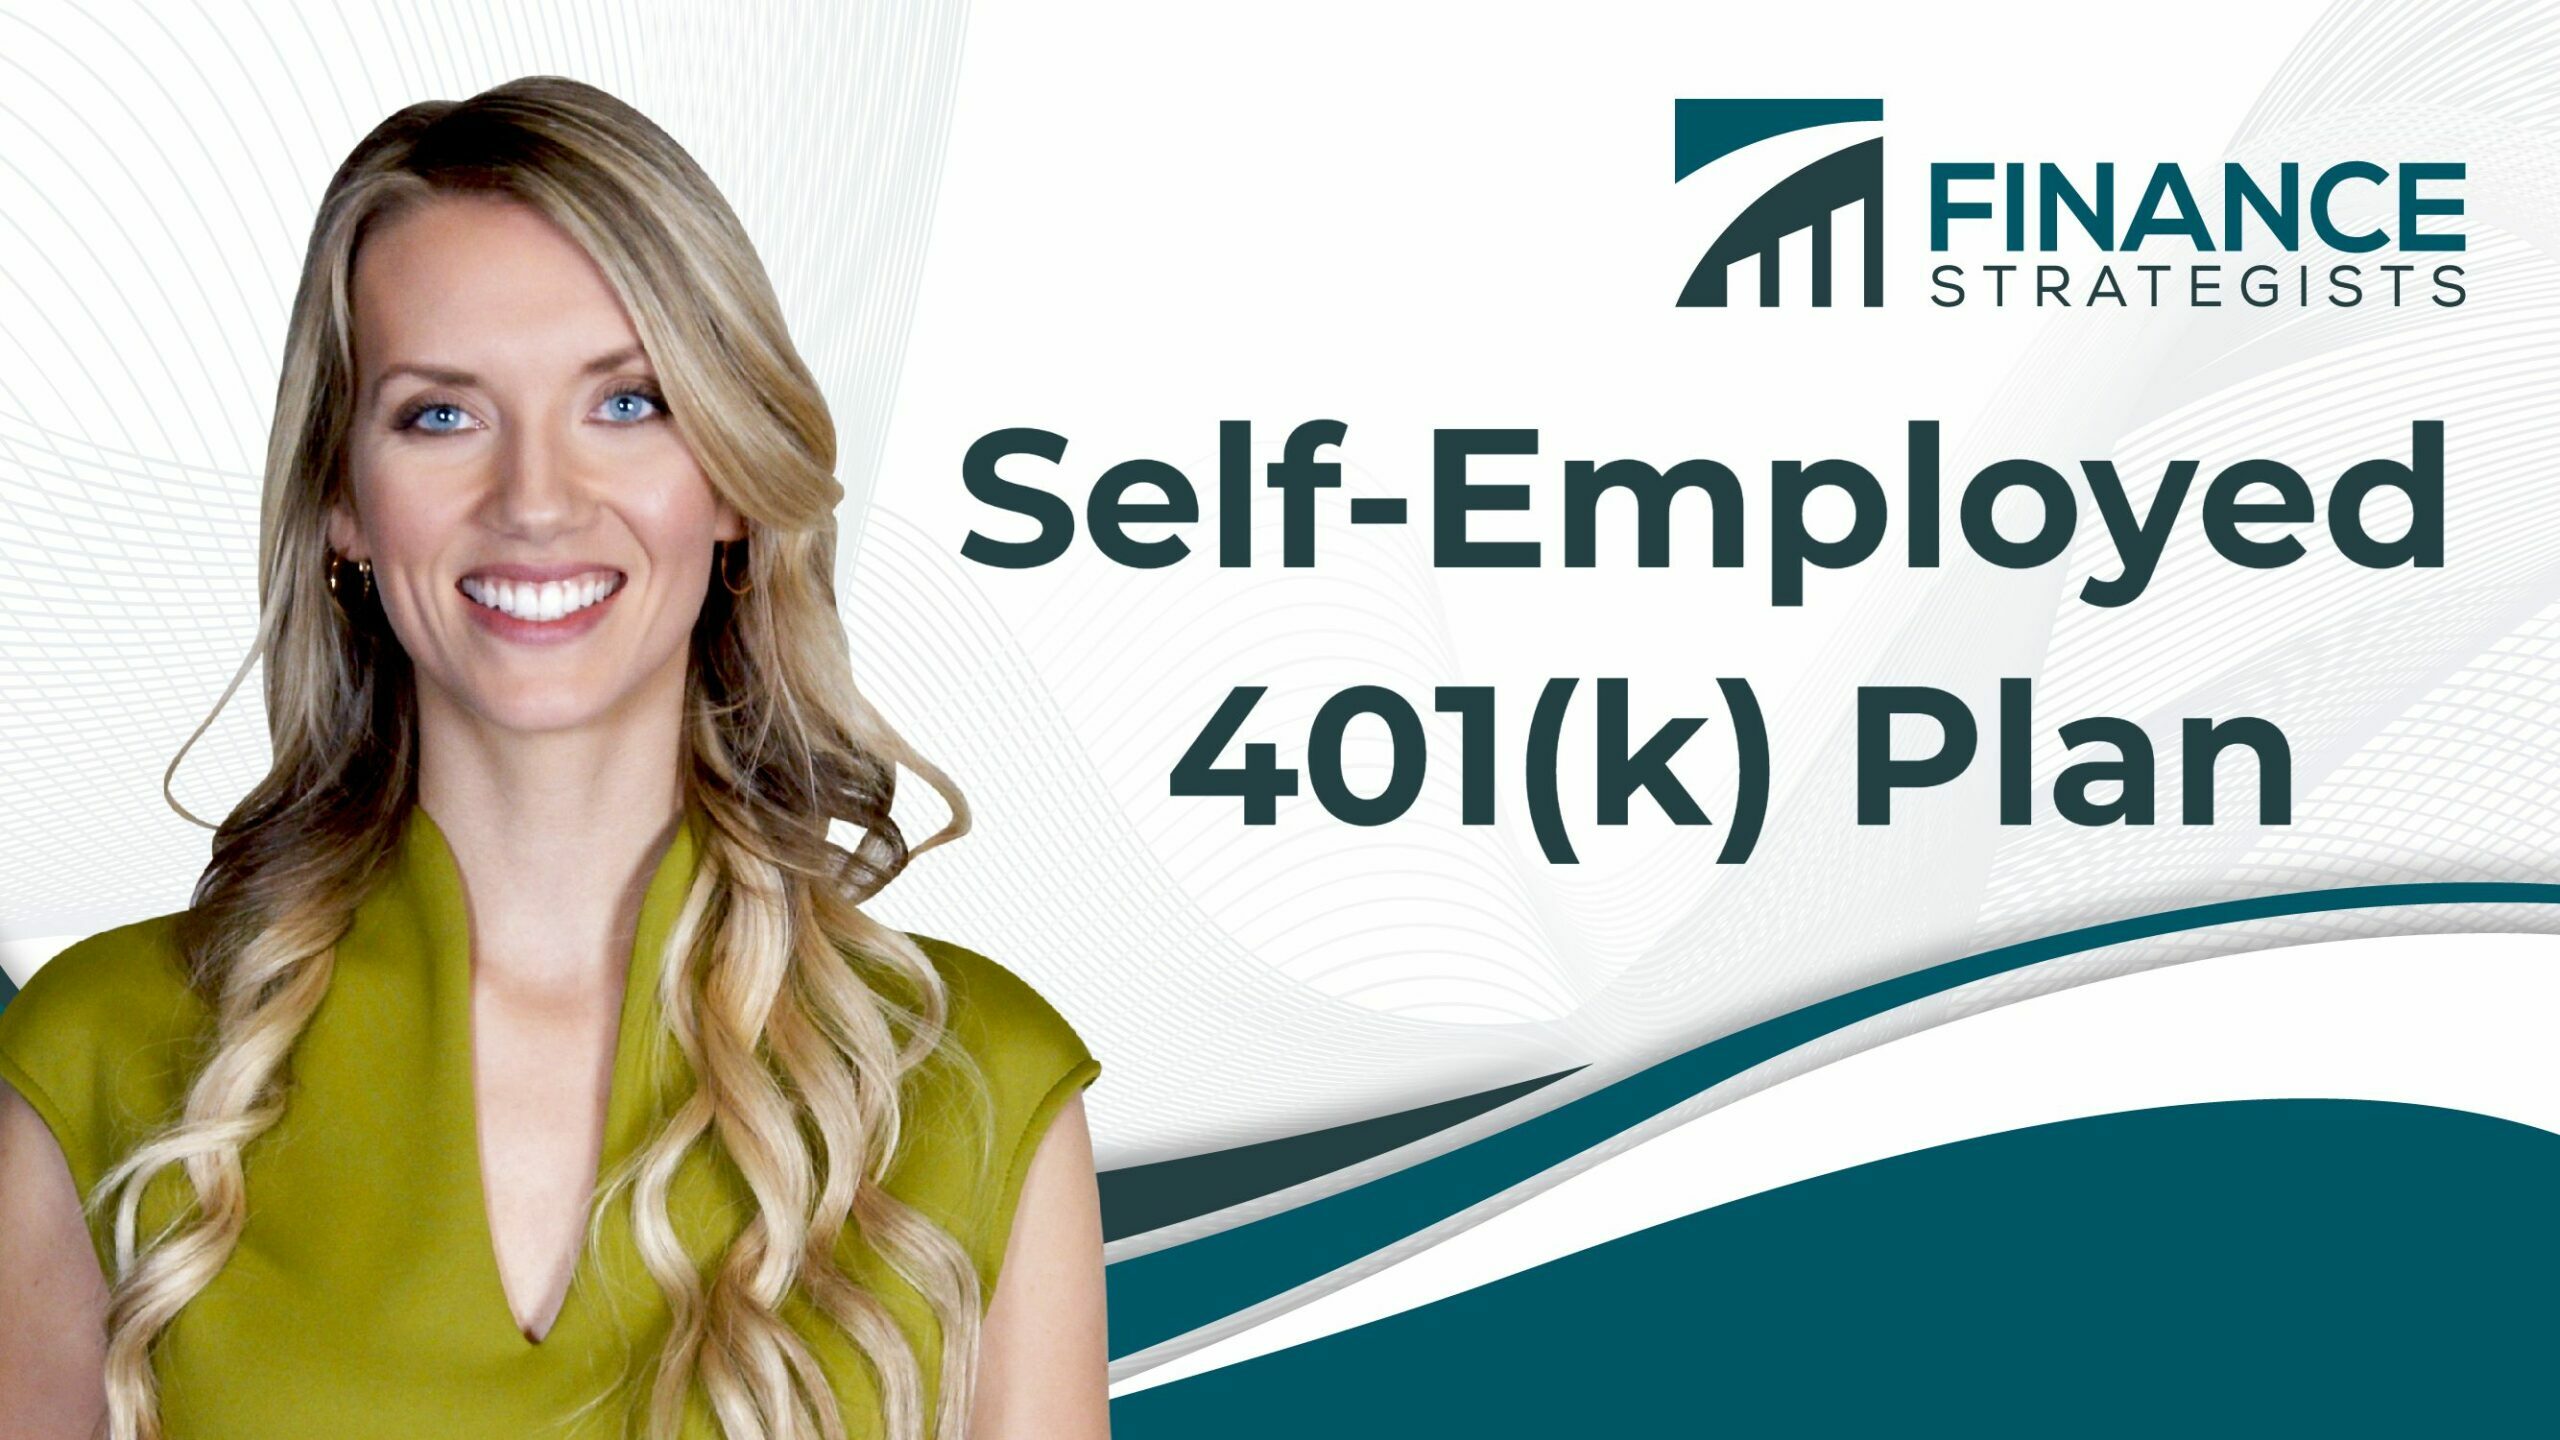 What Is a SelfEmployed 401(k) Plan? Finance Strategists